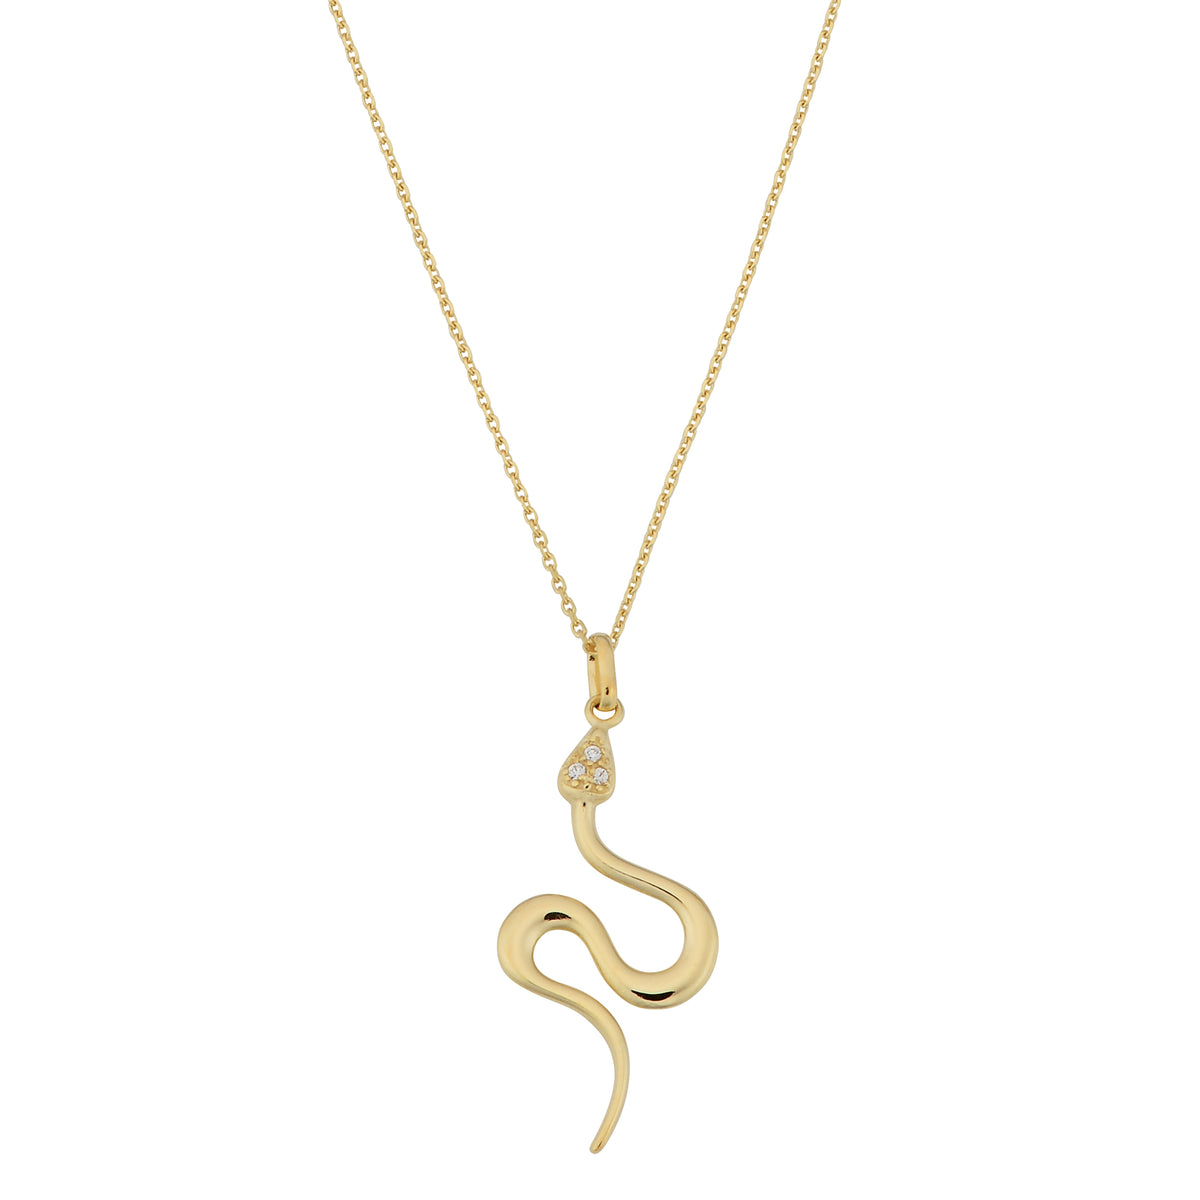 10K Yellow Gold Cubic Zirconia Snake Pendant Necklace, 18" fine designer jewelry for men and women